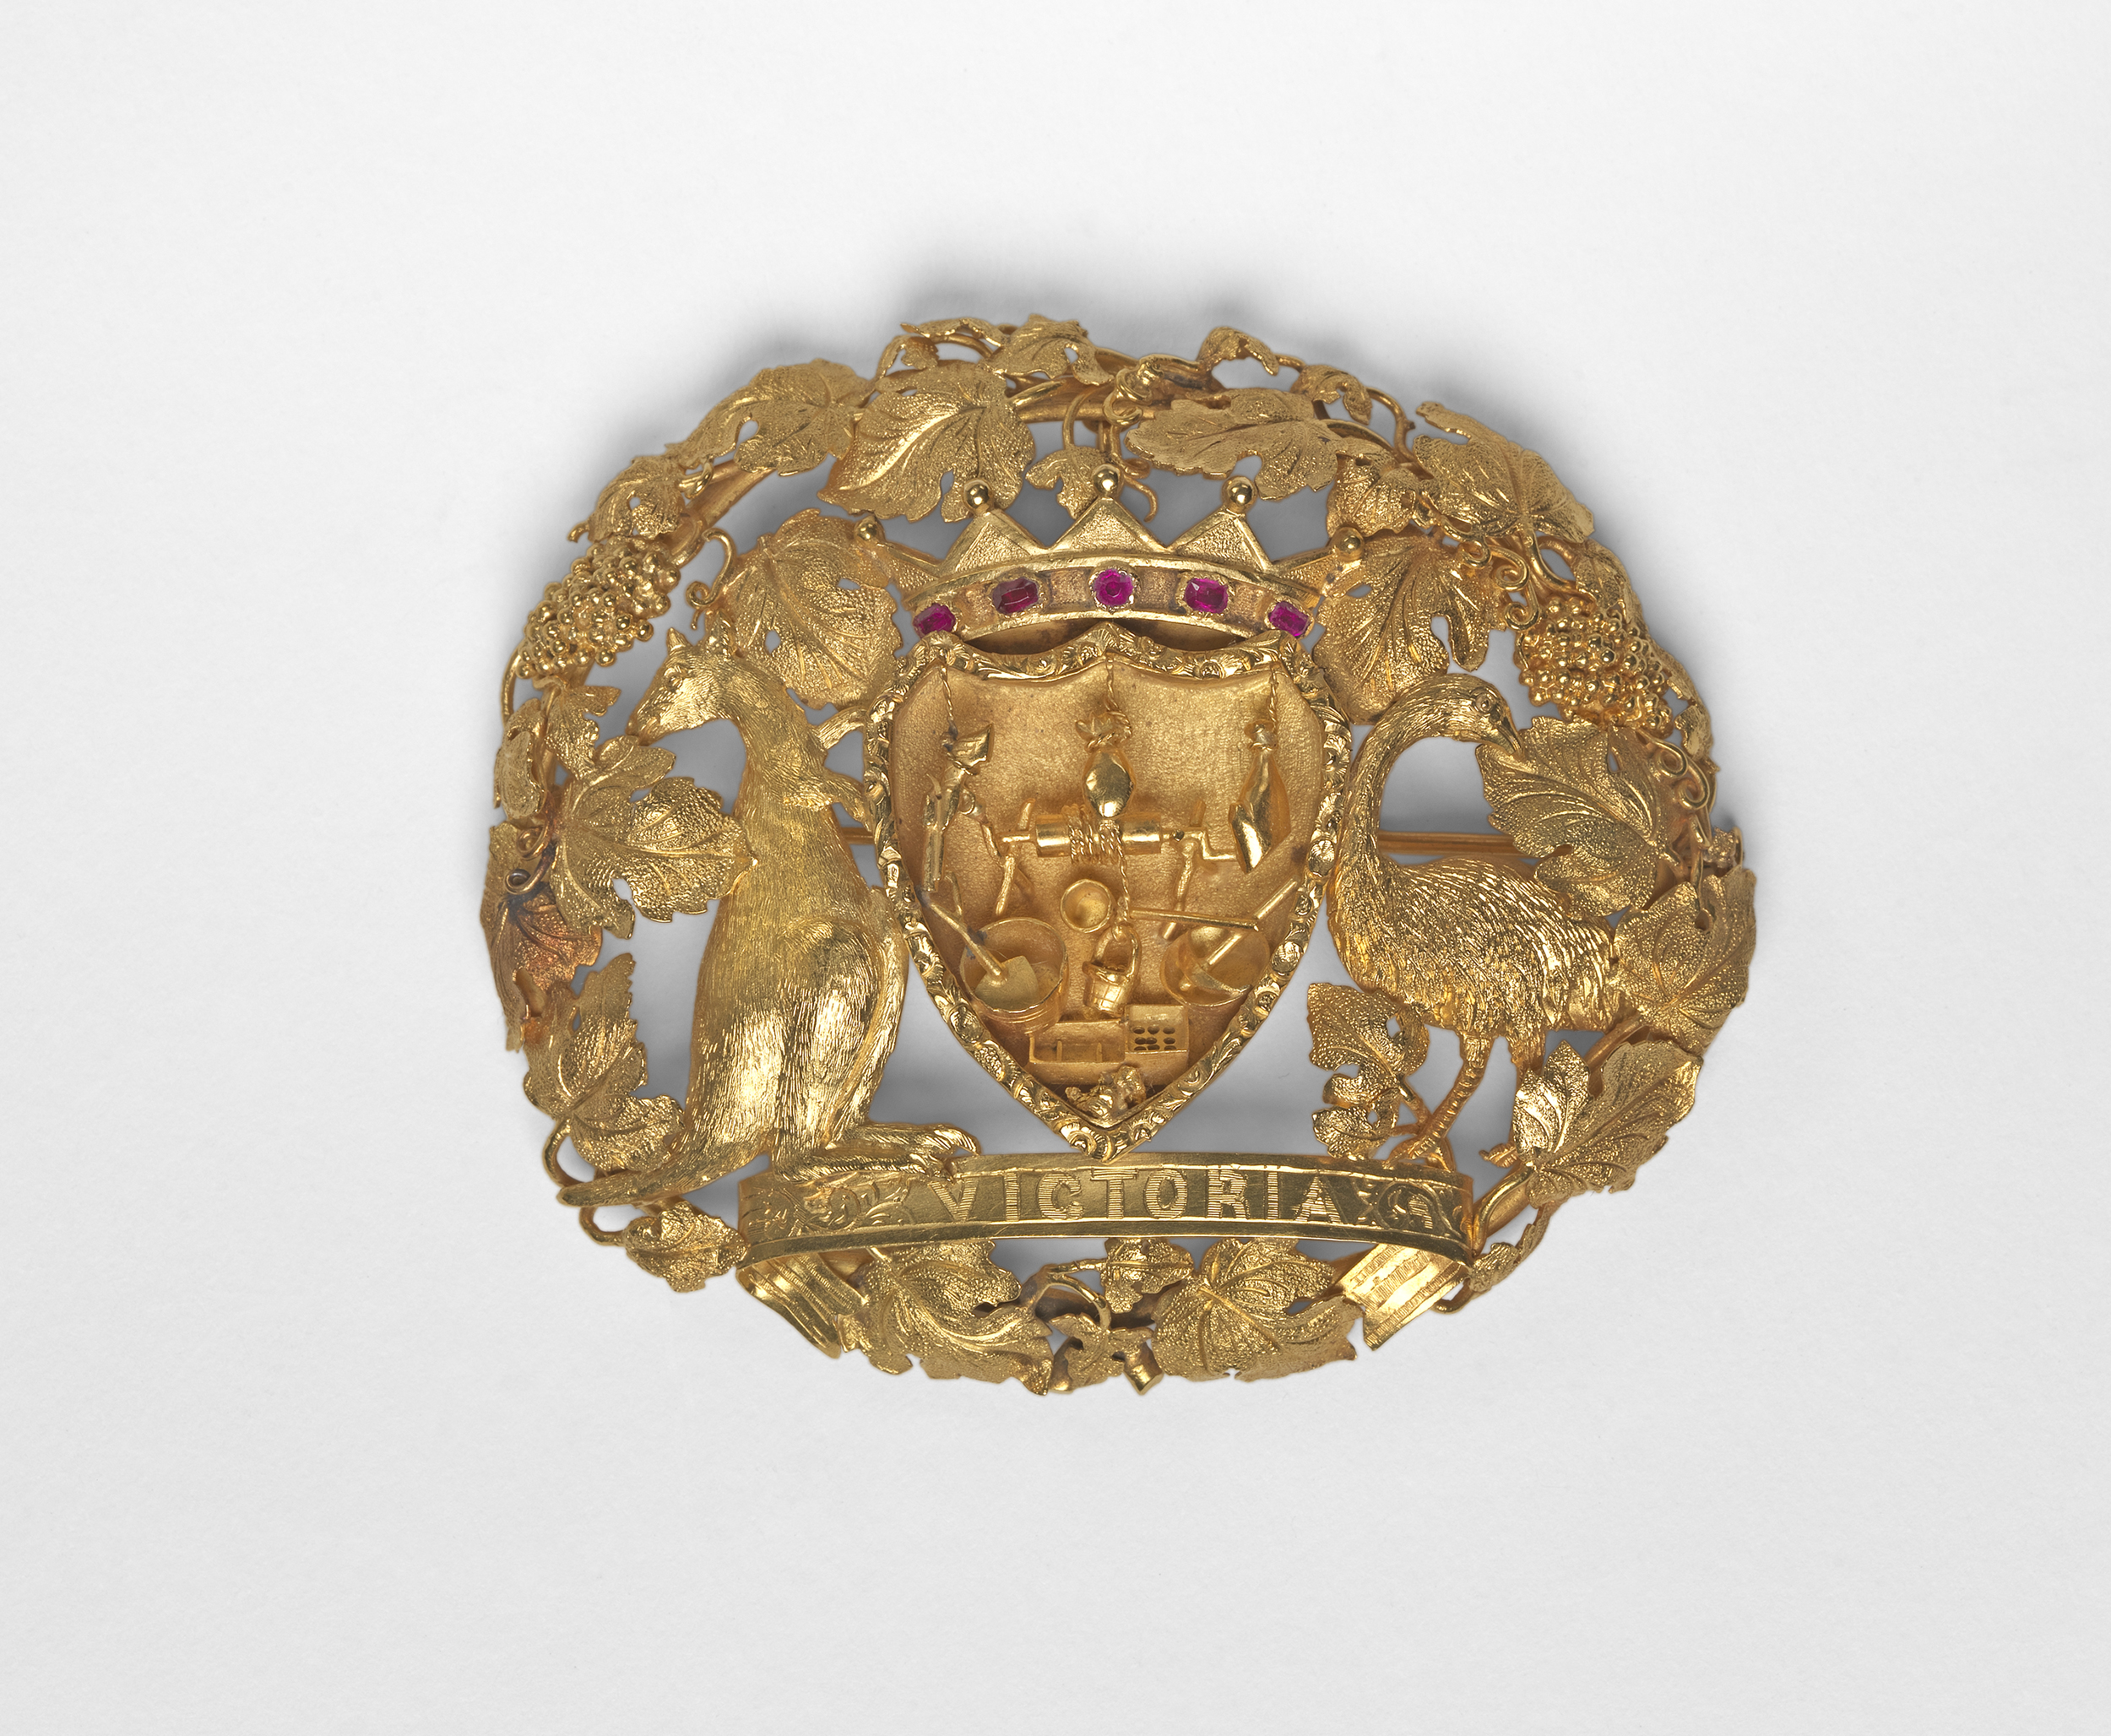   Unknown silversmith , &nbsp;Lola Montez brooch, c.1855, gold, rubies. &nbsp;National Gallery of Australia, Canberra. Purchased 2014. 